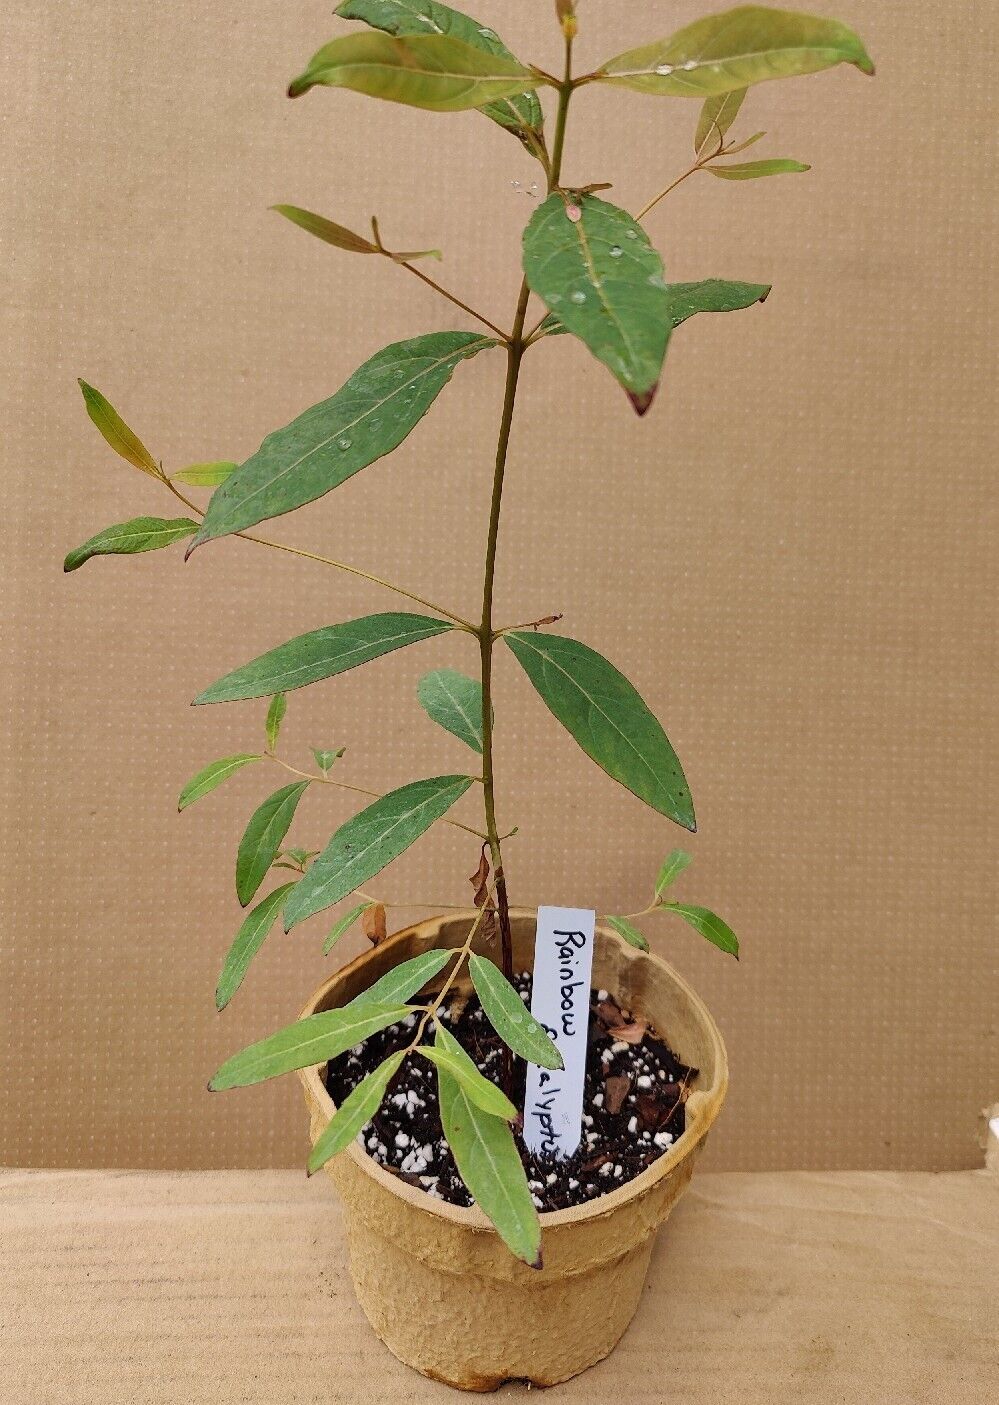 Rainbow Eucalyptus grown from seed / 12 inch tall seedling/Fast Growing In Pot